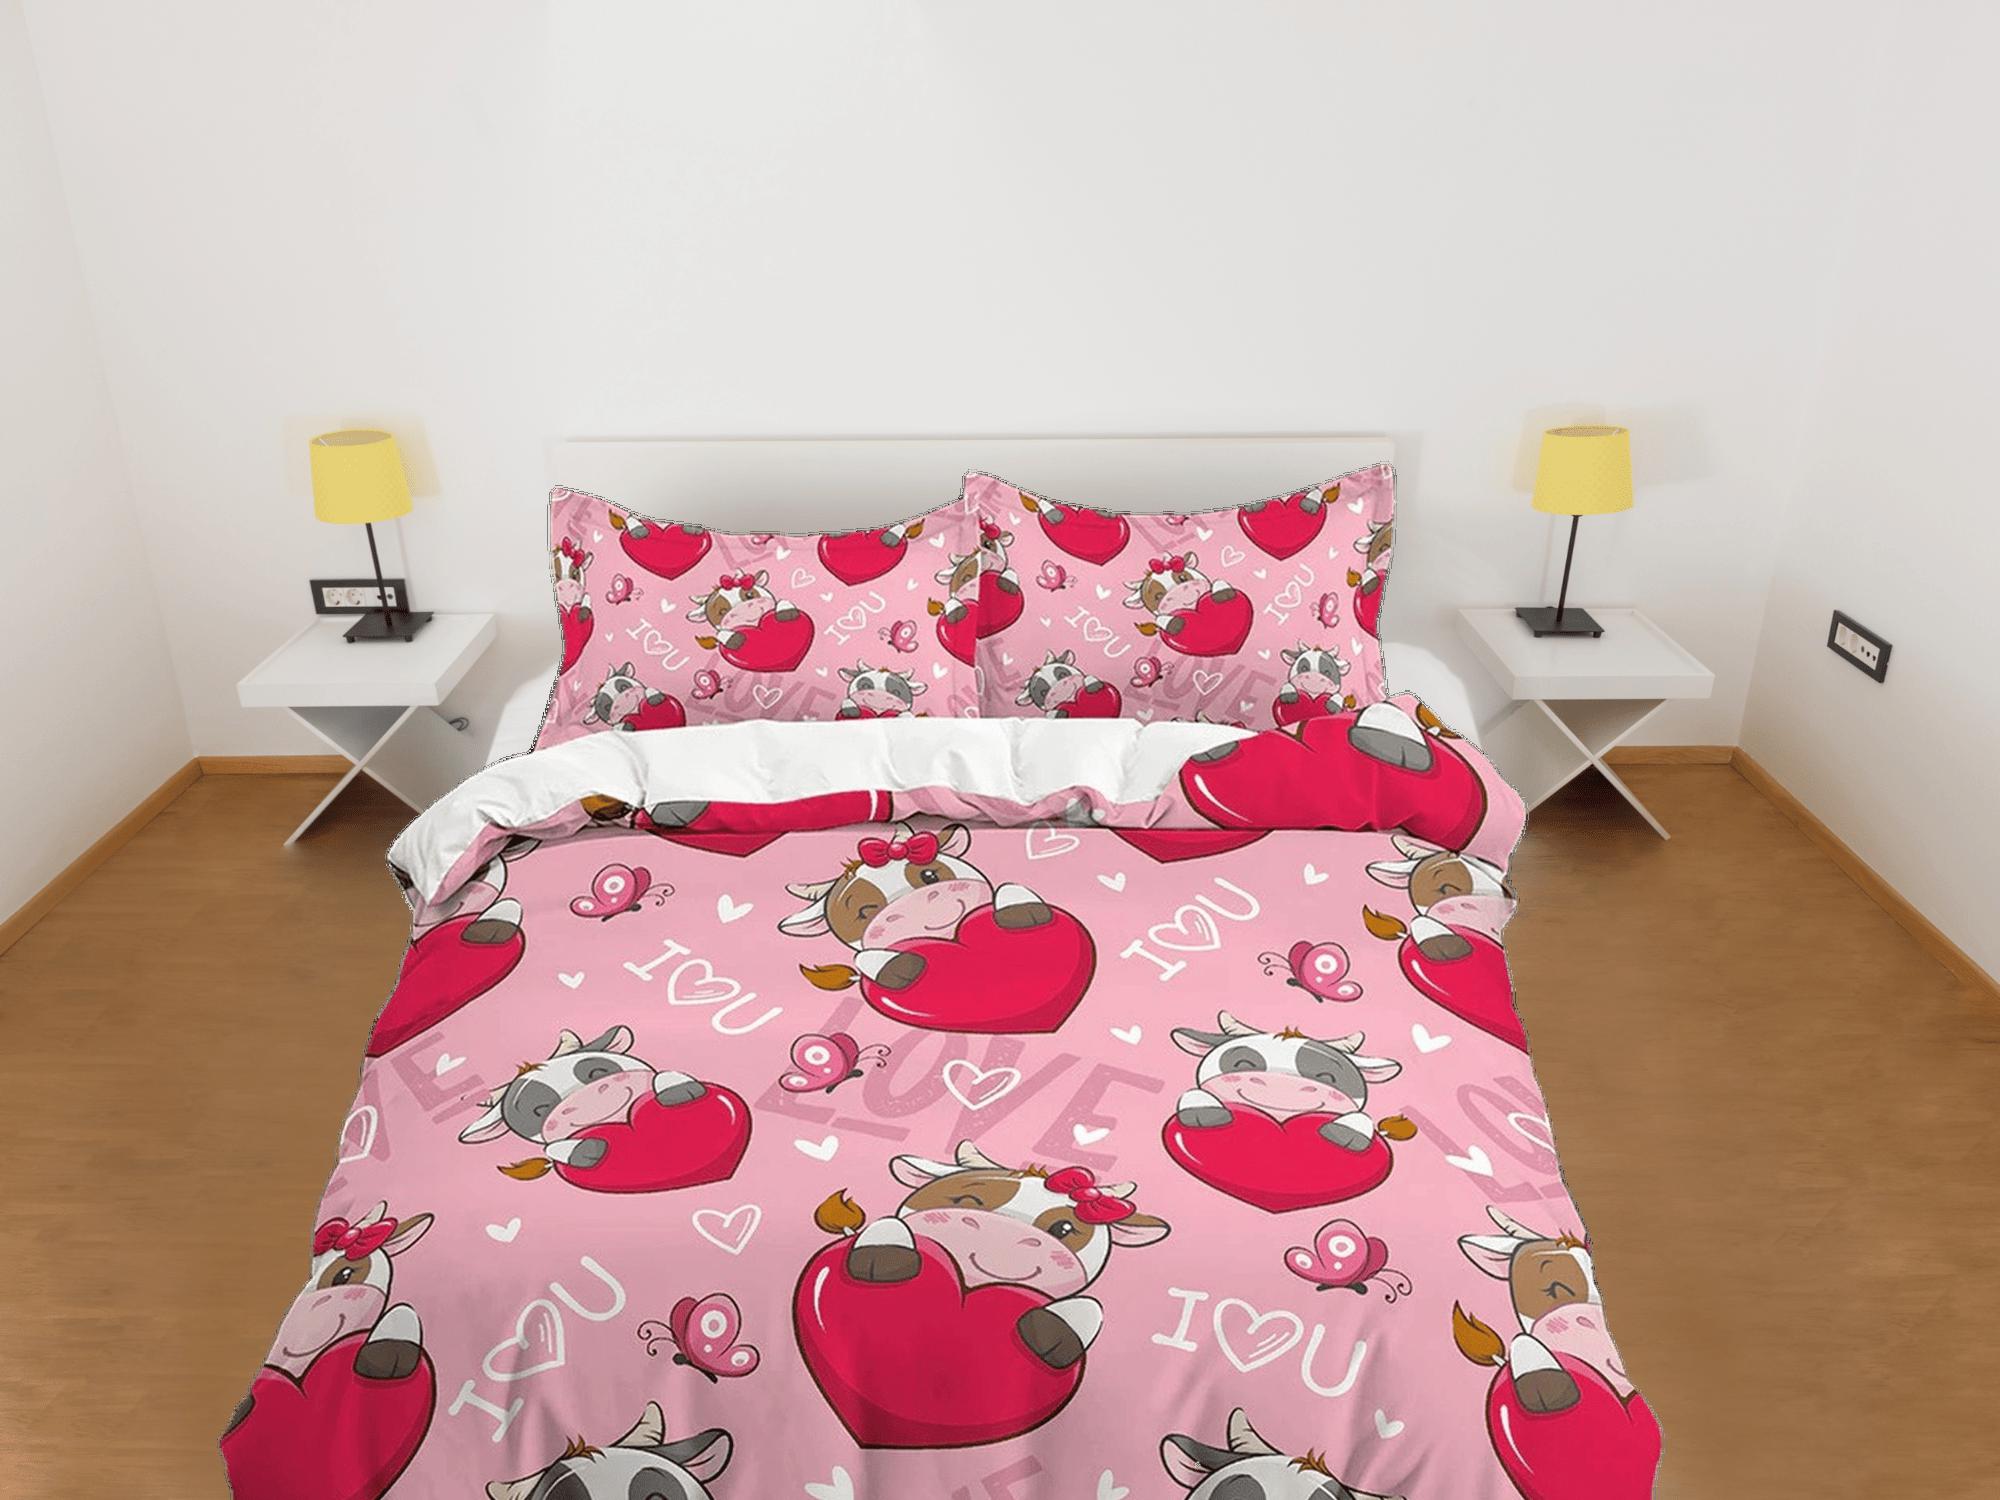 daintyduvet Cute Cow with Heart, Pink Girl Toddler Bedding, Unique Duvet Cover Nursery Kids, Crib Bedding, Baby Zipper Bedding, King Queen Full Twin